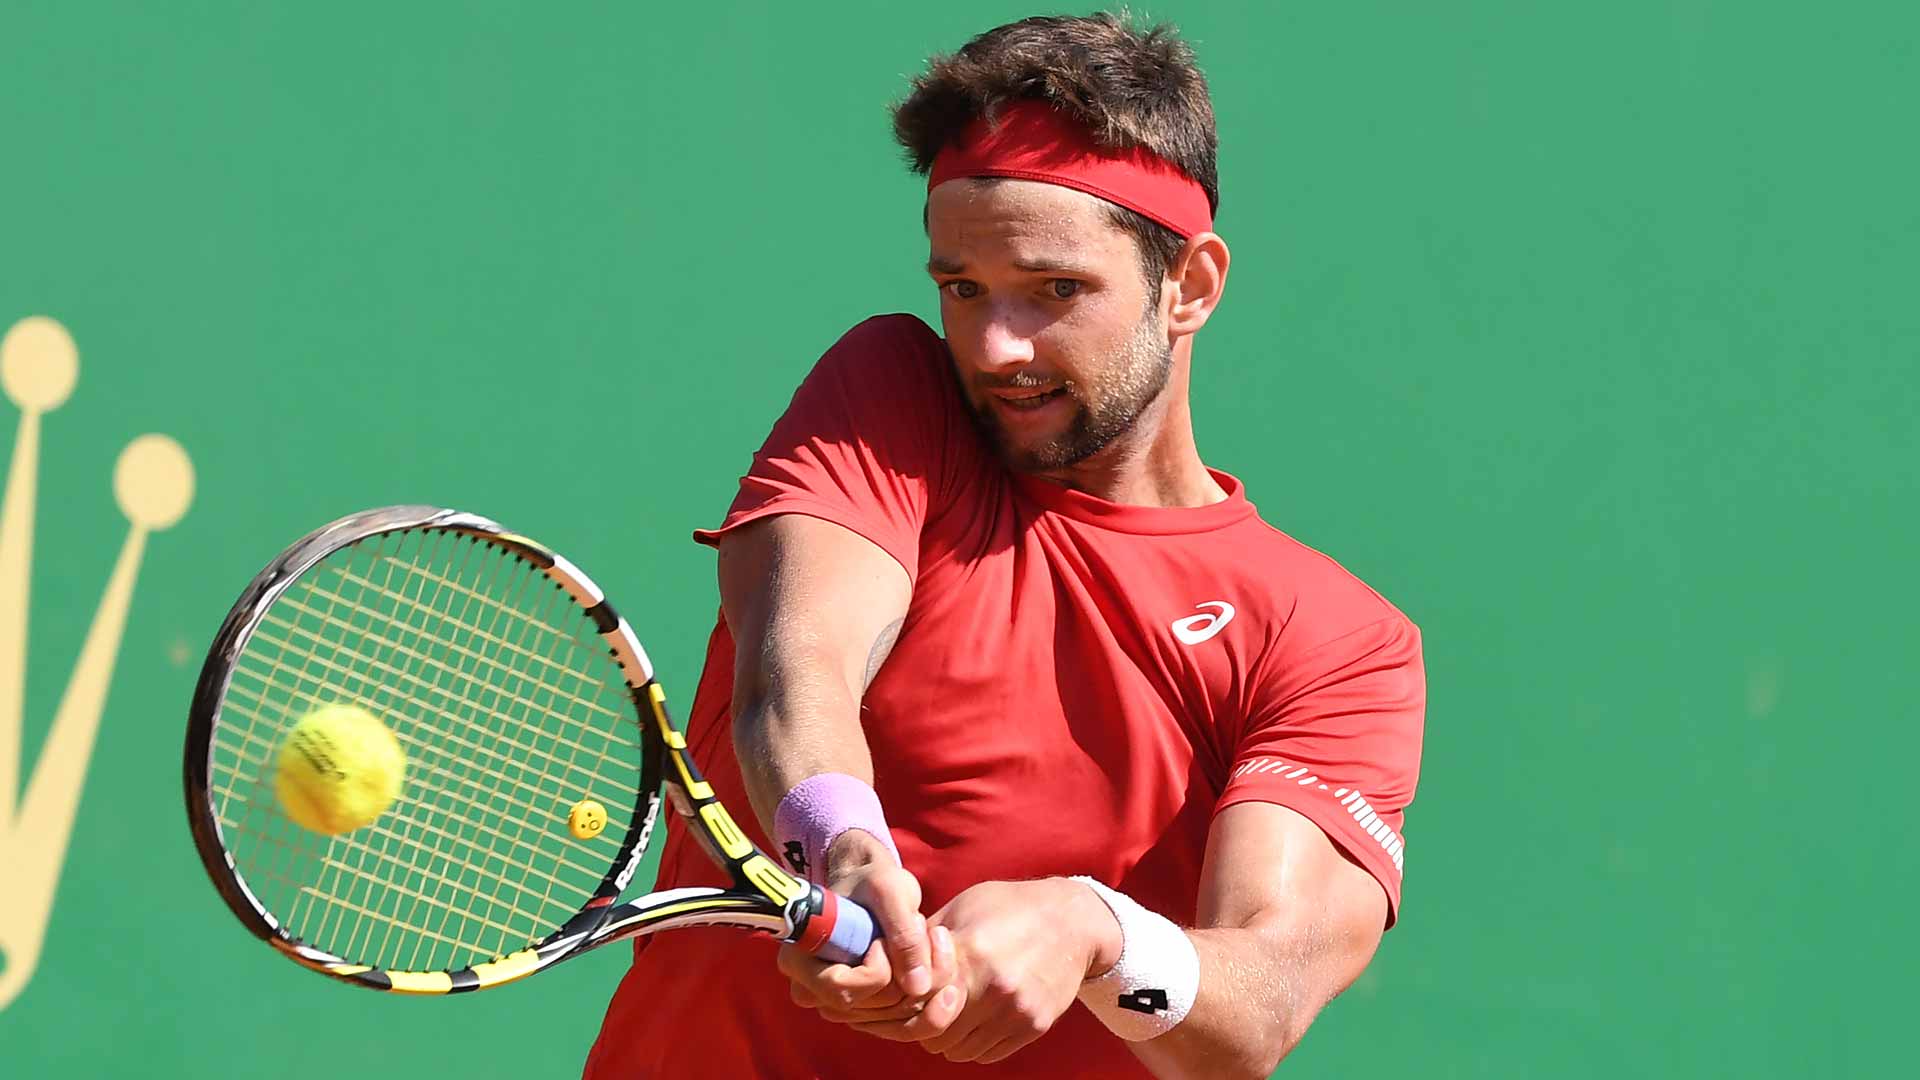 Ivan Gakhov arrived at the Rolex Monte-Carlo Masters without a tour-level win to his name.